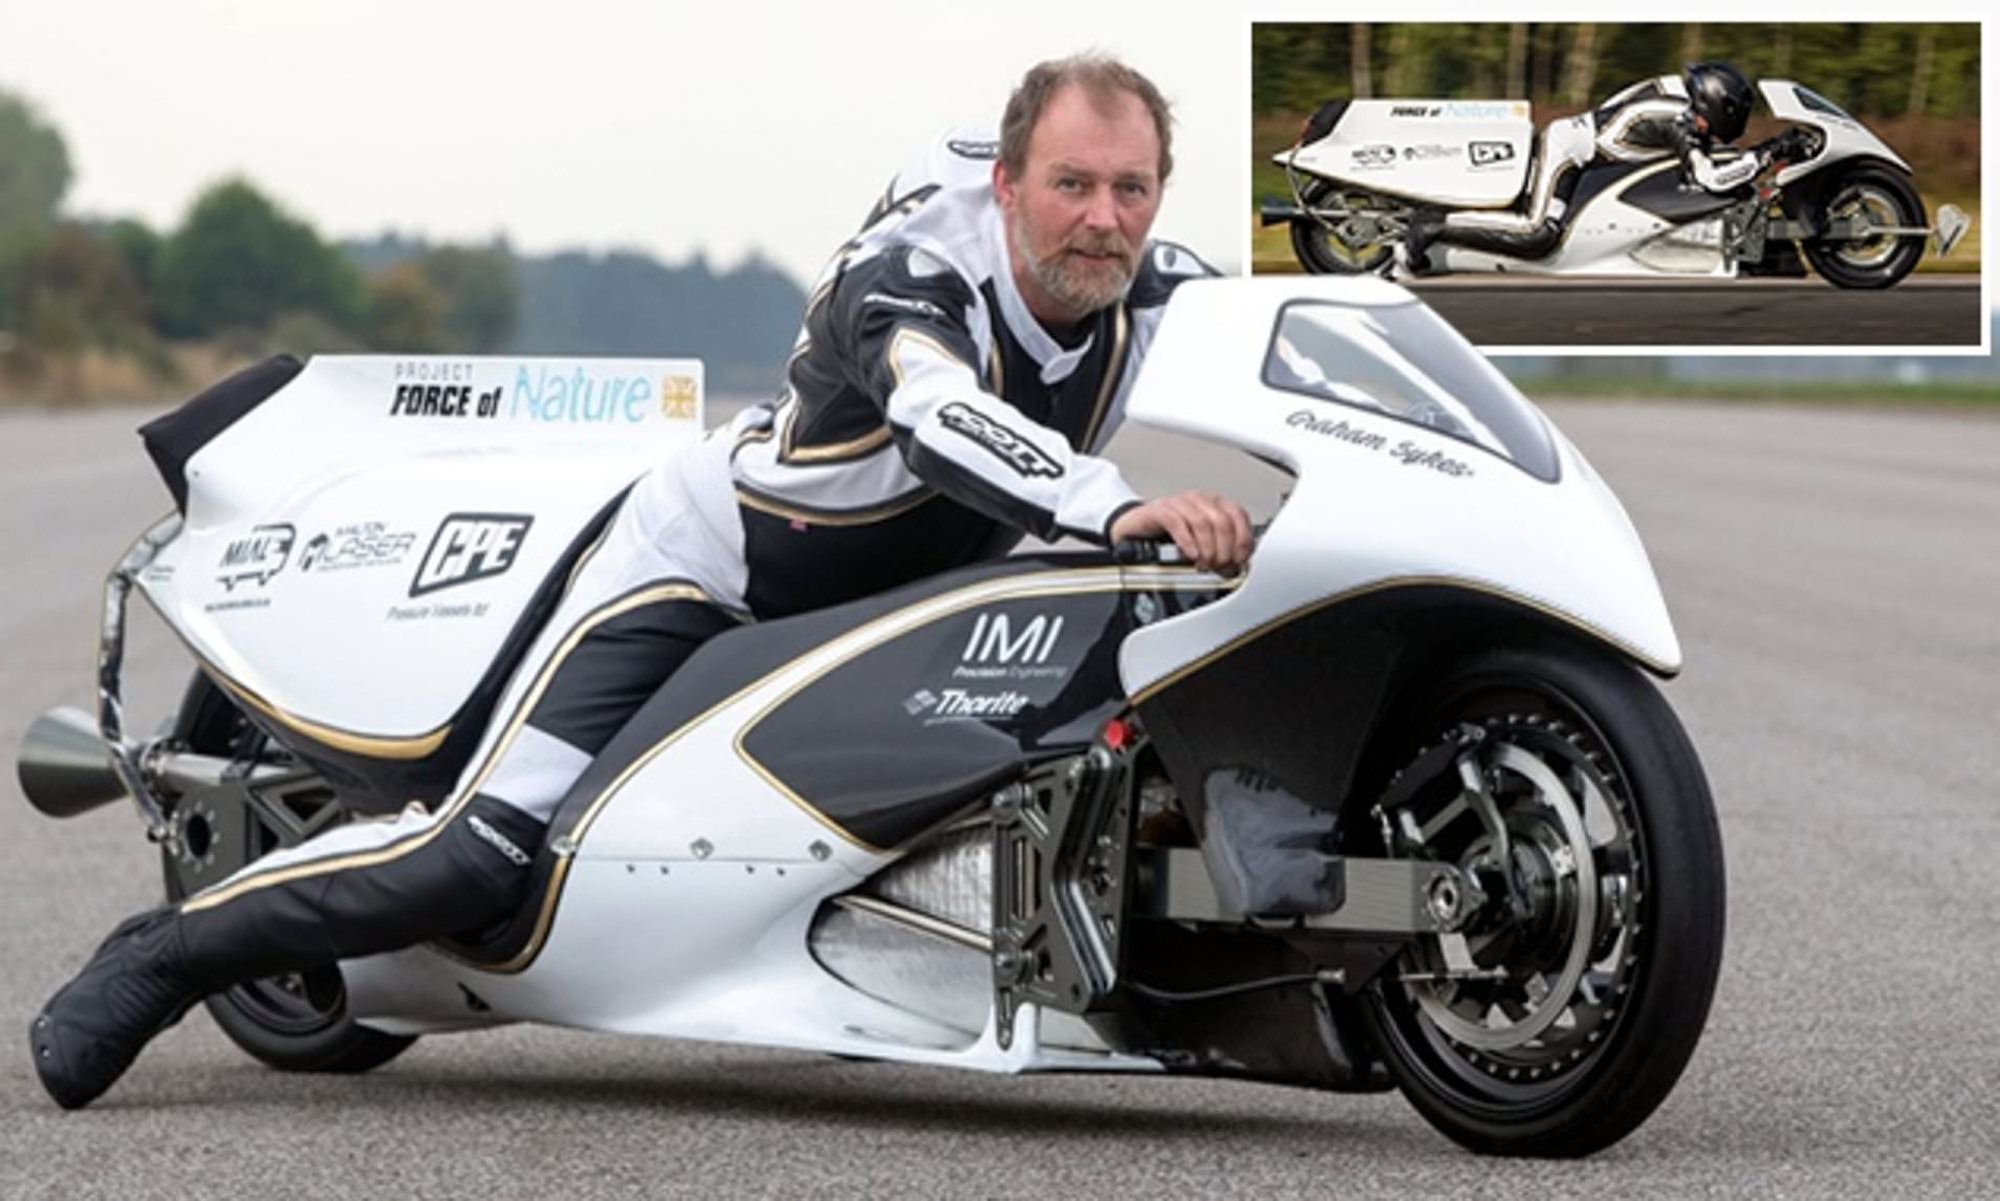 A view of Graham Sykes on his "Force of Nature," currently the record holder for "World's Fastest Steam-Propelled Motorcycle." Media sourced from This Is Money.